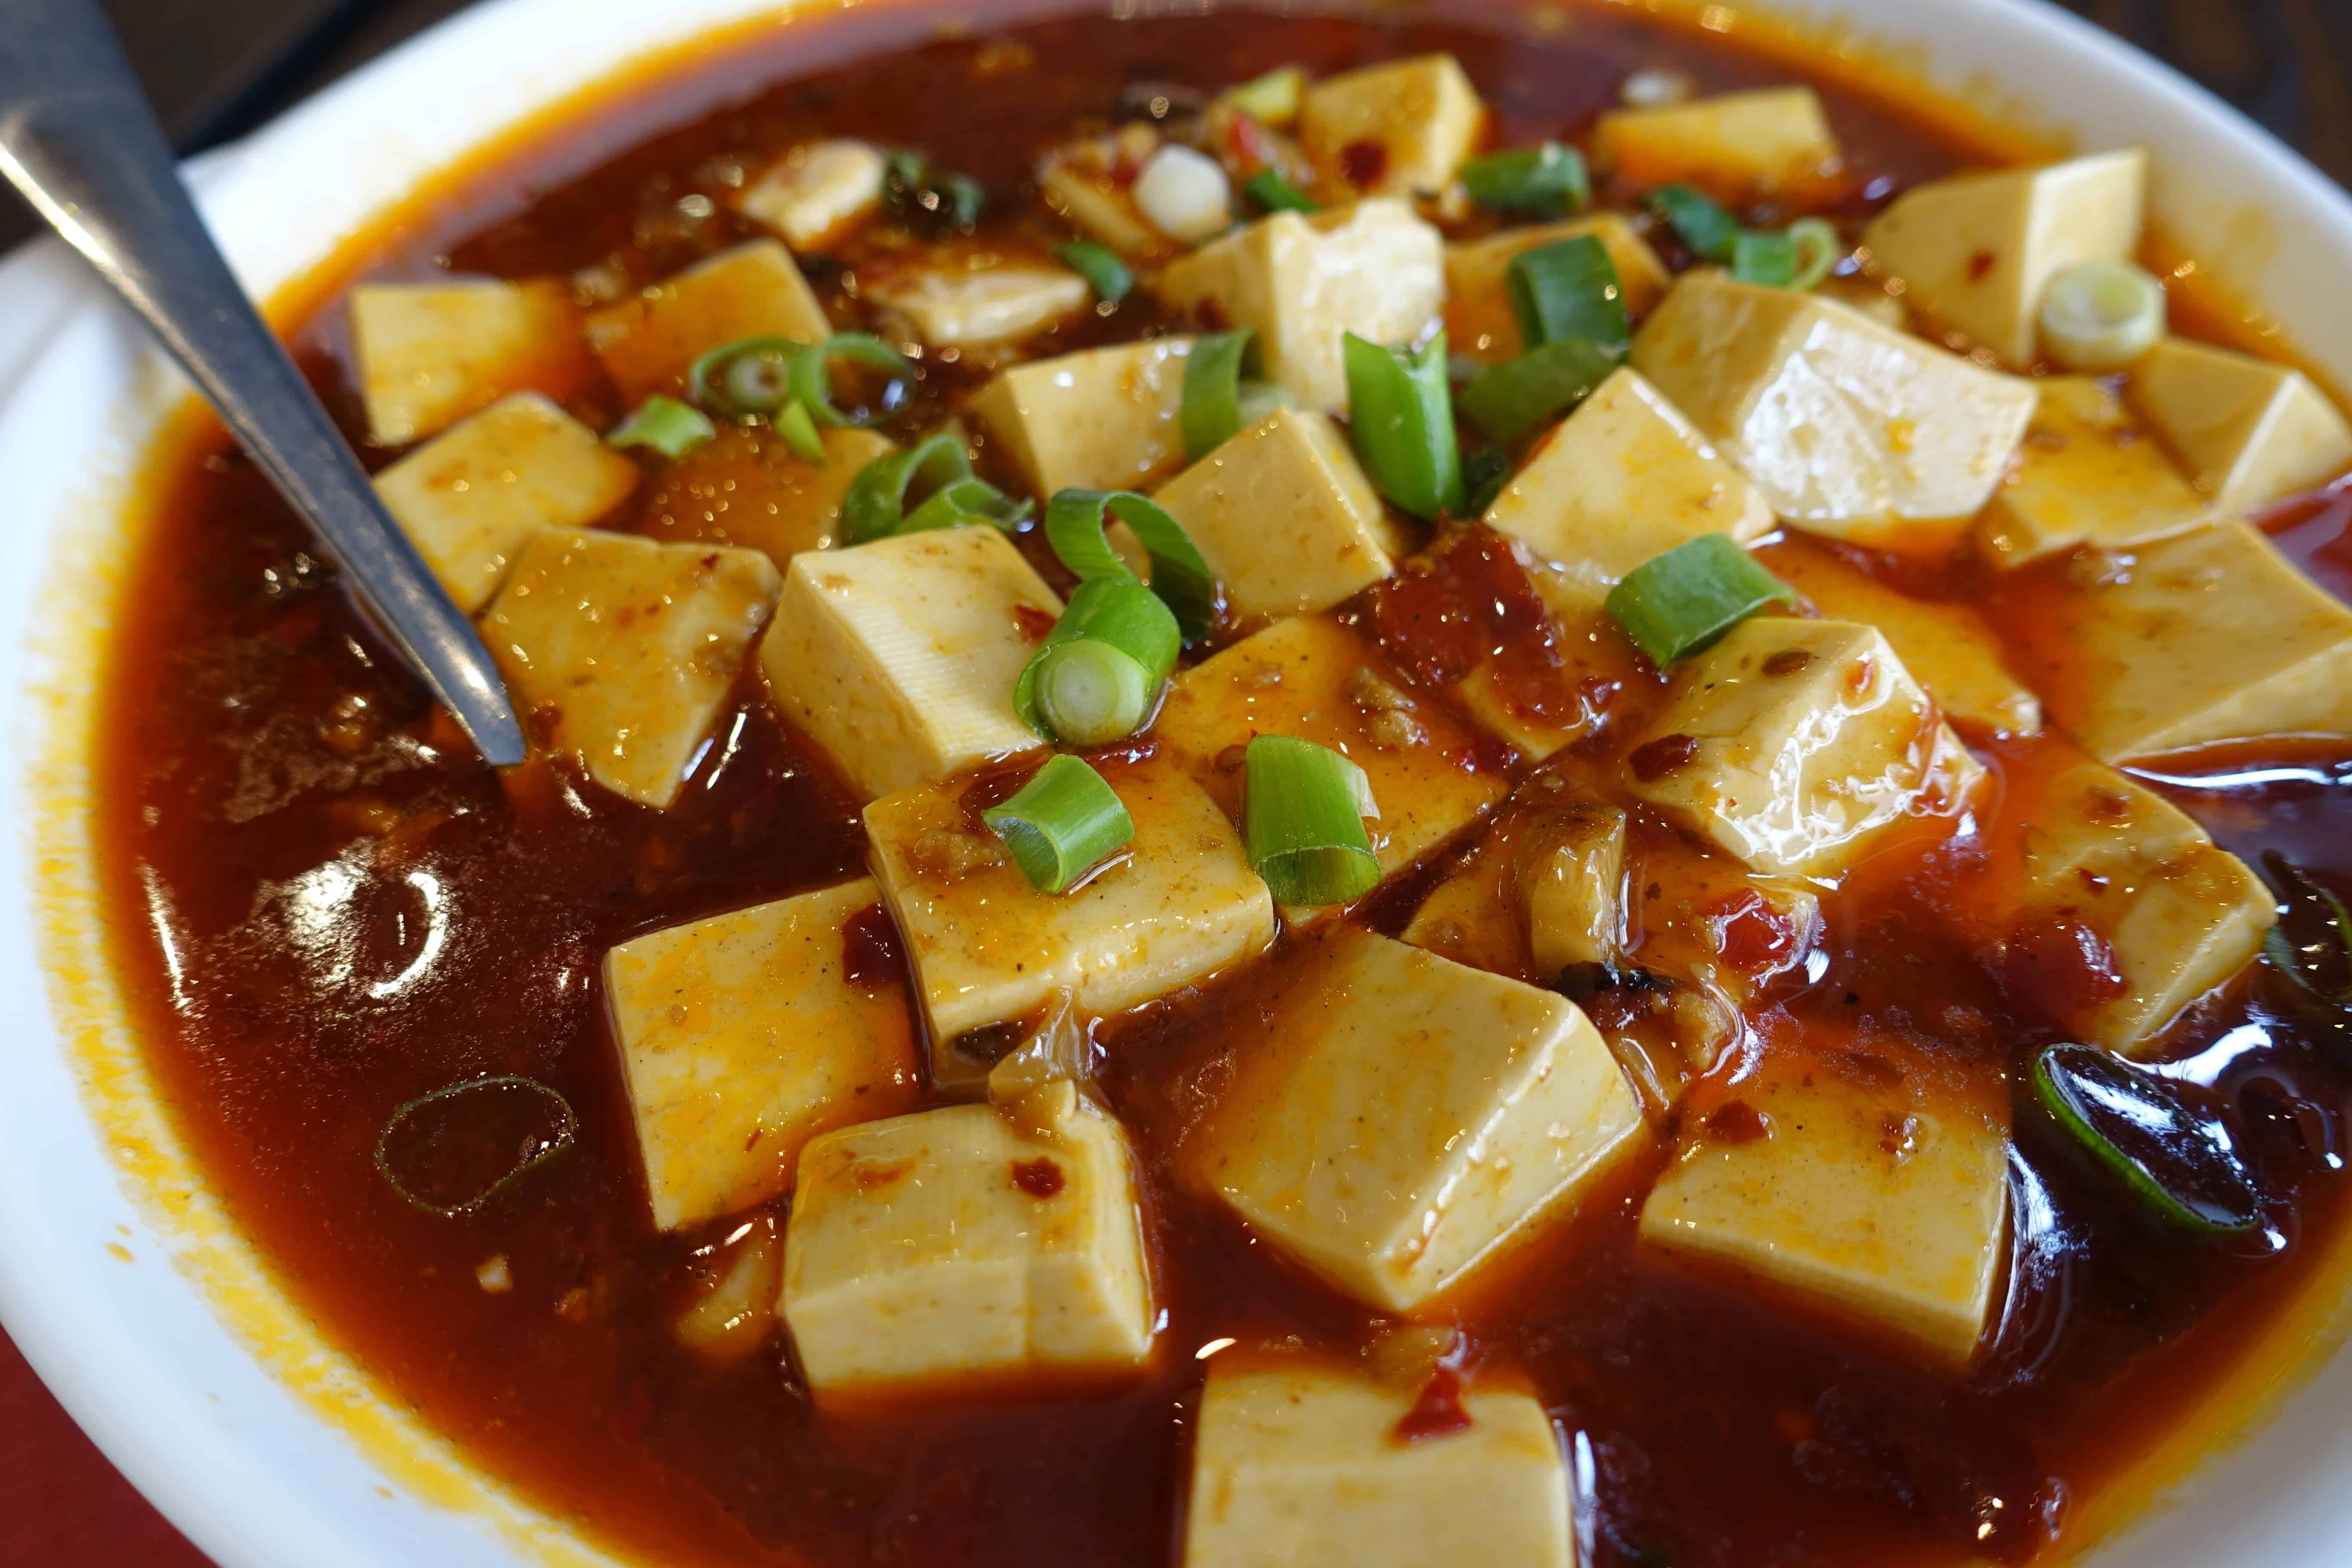 Mapo Tofu is one of my favorites. Image credits: Guilhem Vellut.